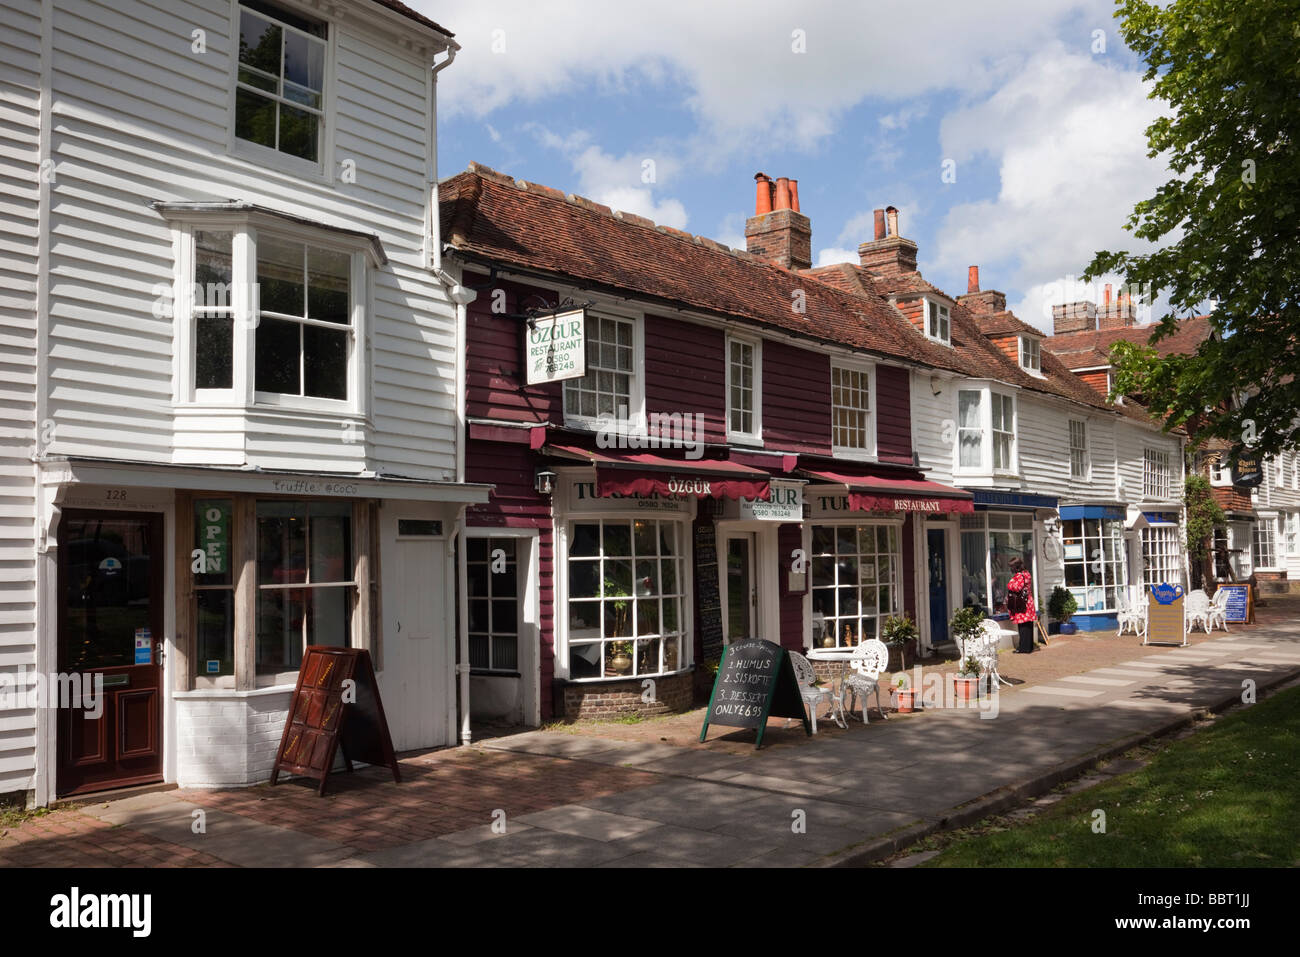 Tenterden Kent England UK  Cafe and small shops in 15th to 18th century buildings on tree-lined High Street in Wealden town Stock Photo